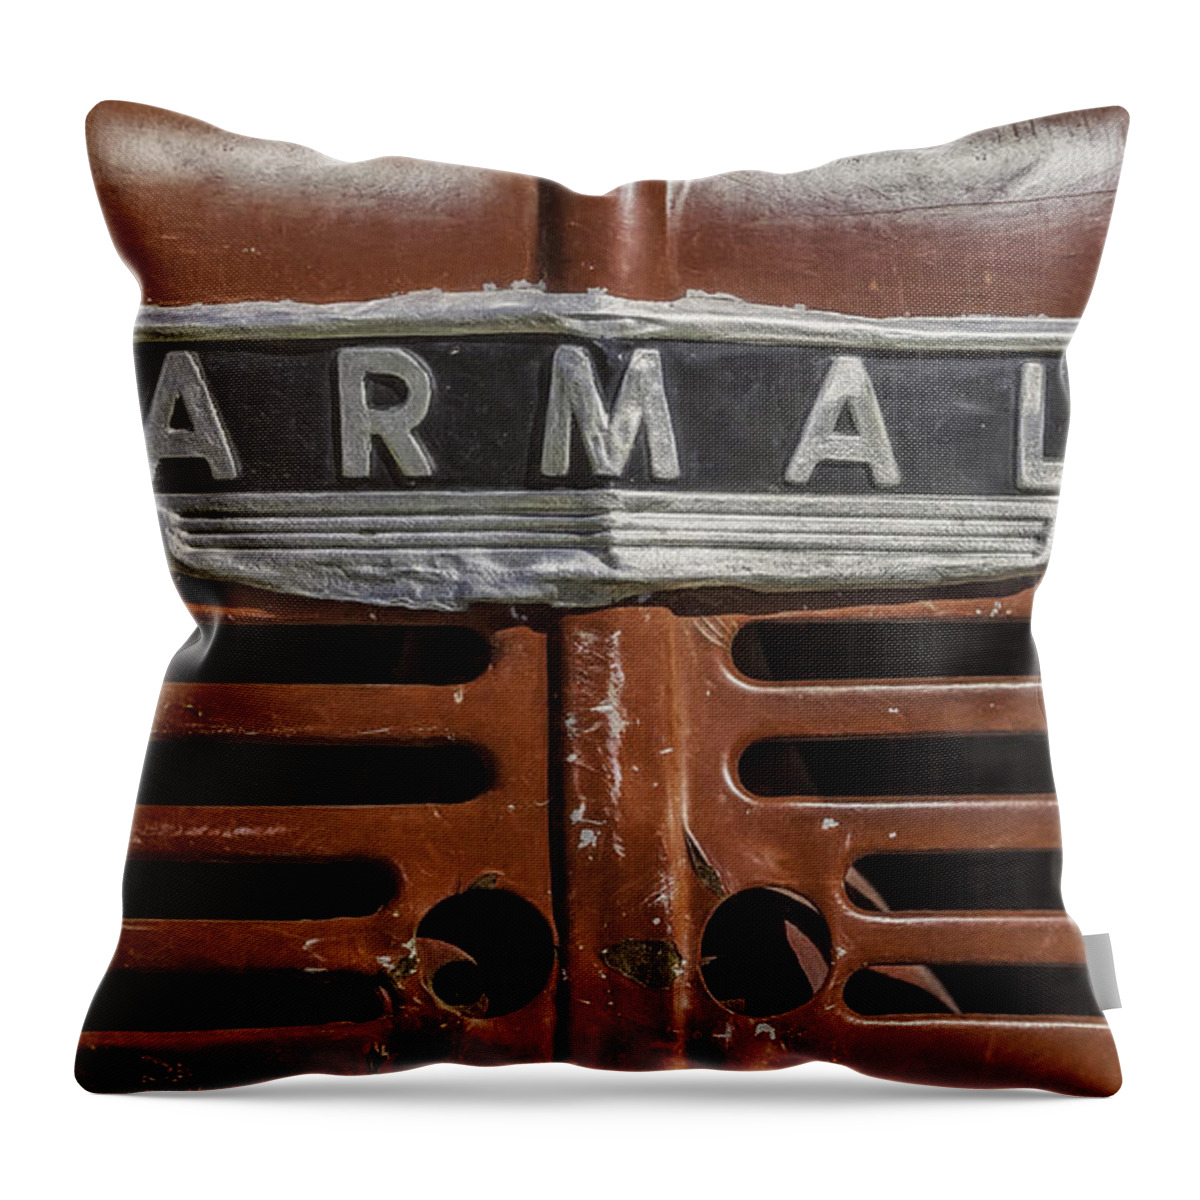 Farmall Tractor Throw Pillow featuring the photograph Vintage Farmall Tractor by Scott Norris